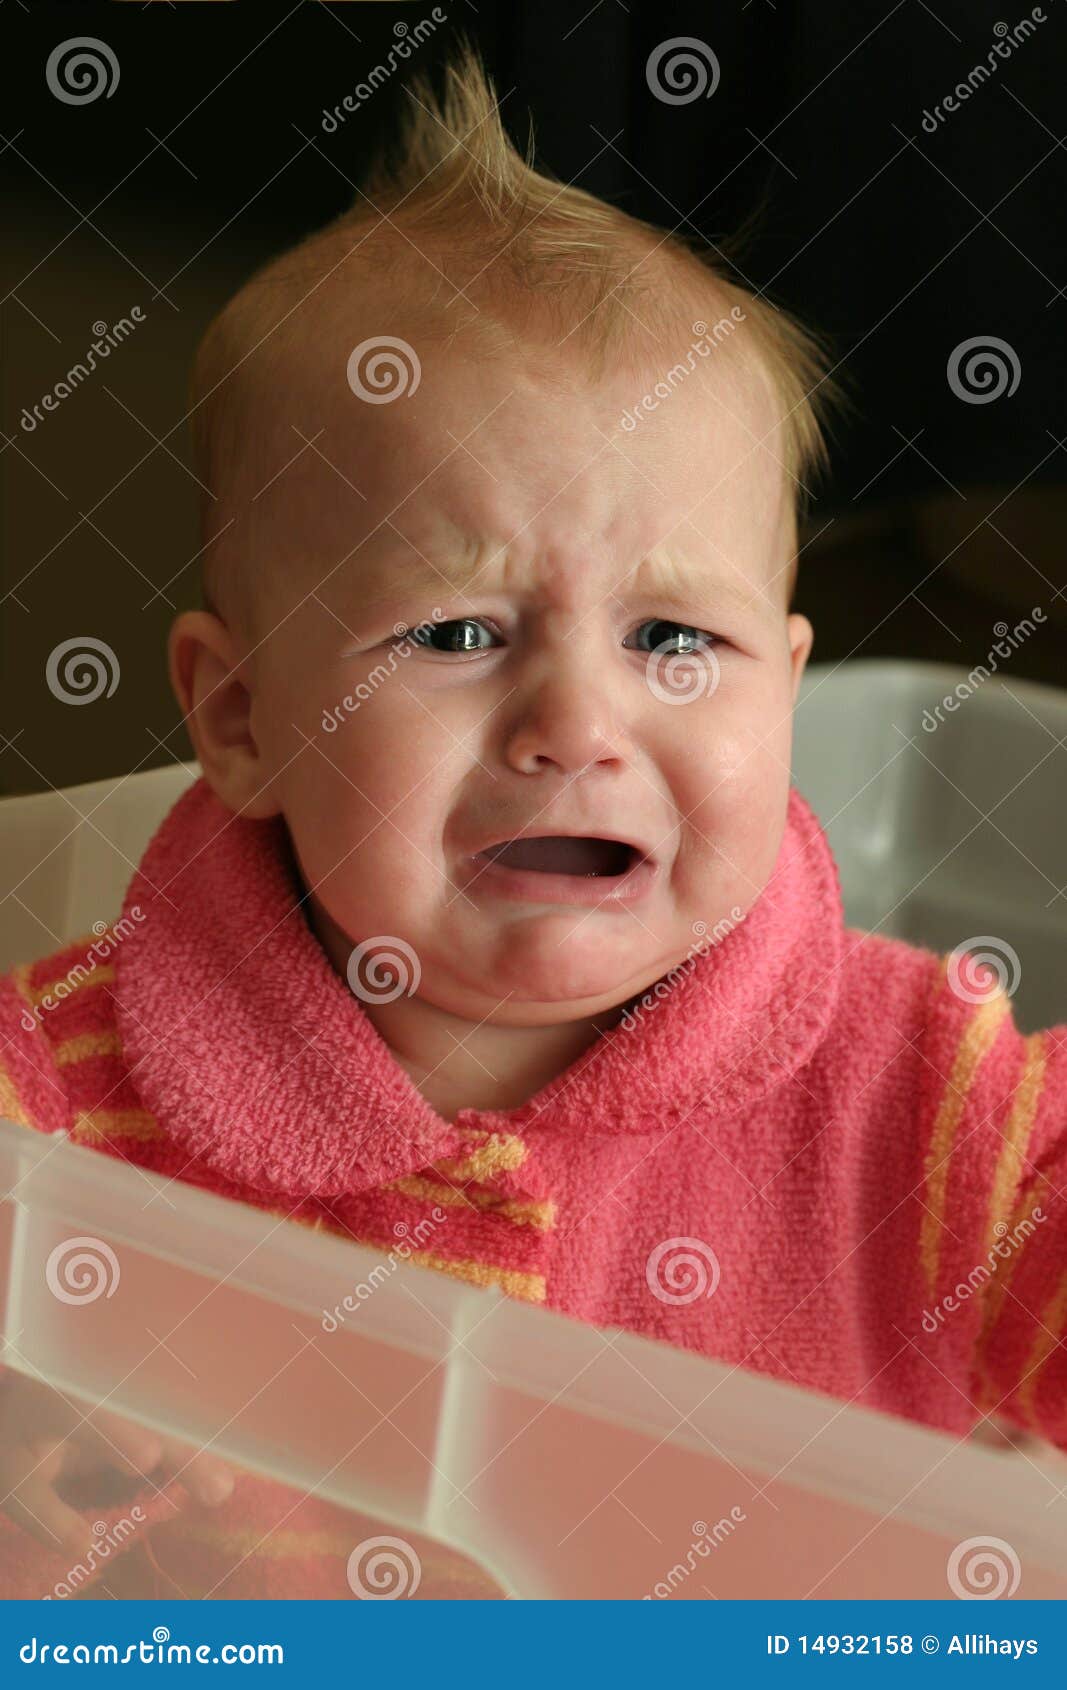 Crying Baby stock photo. Image of caucasian, girl, face - 14932158